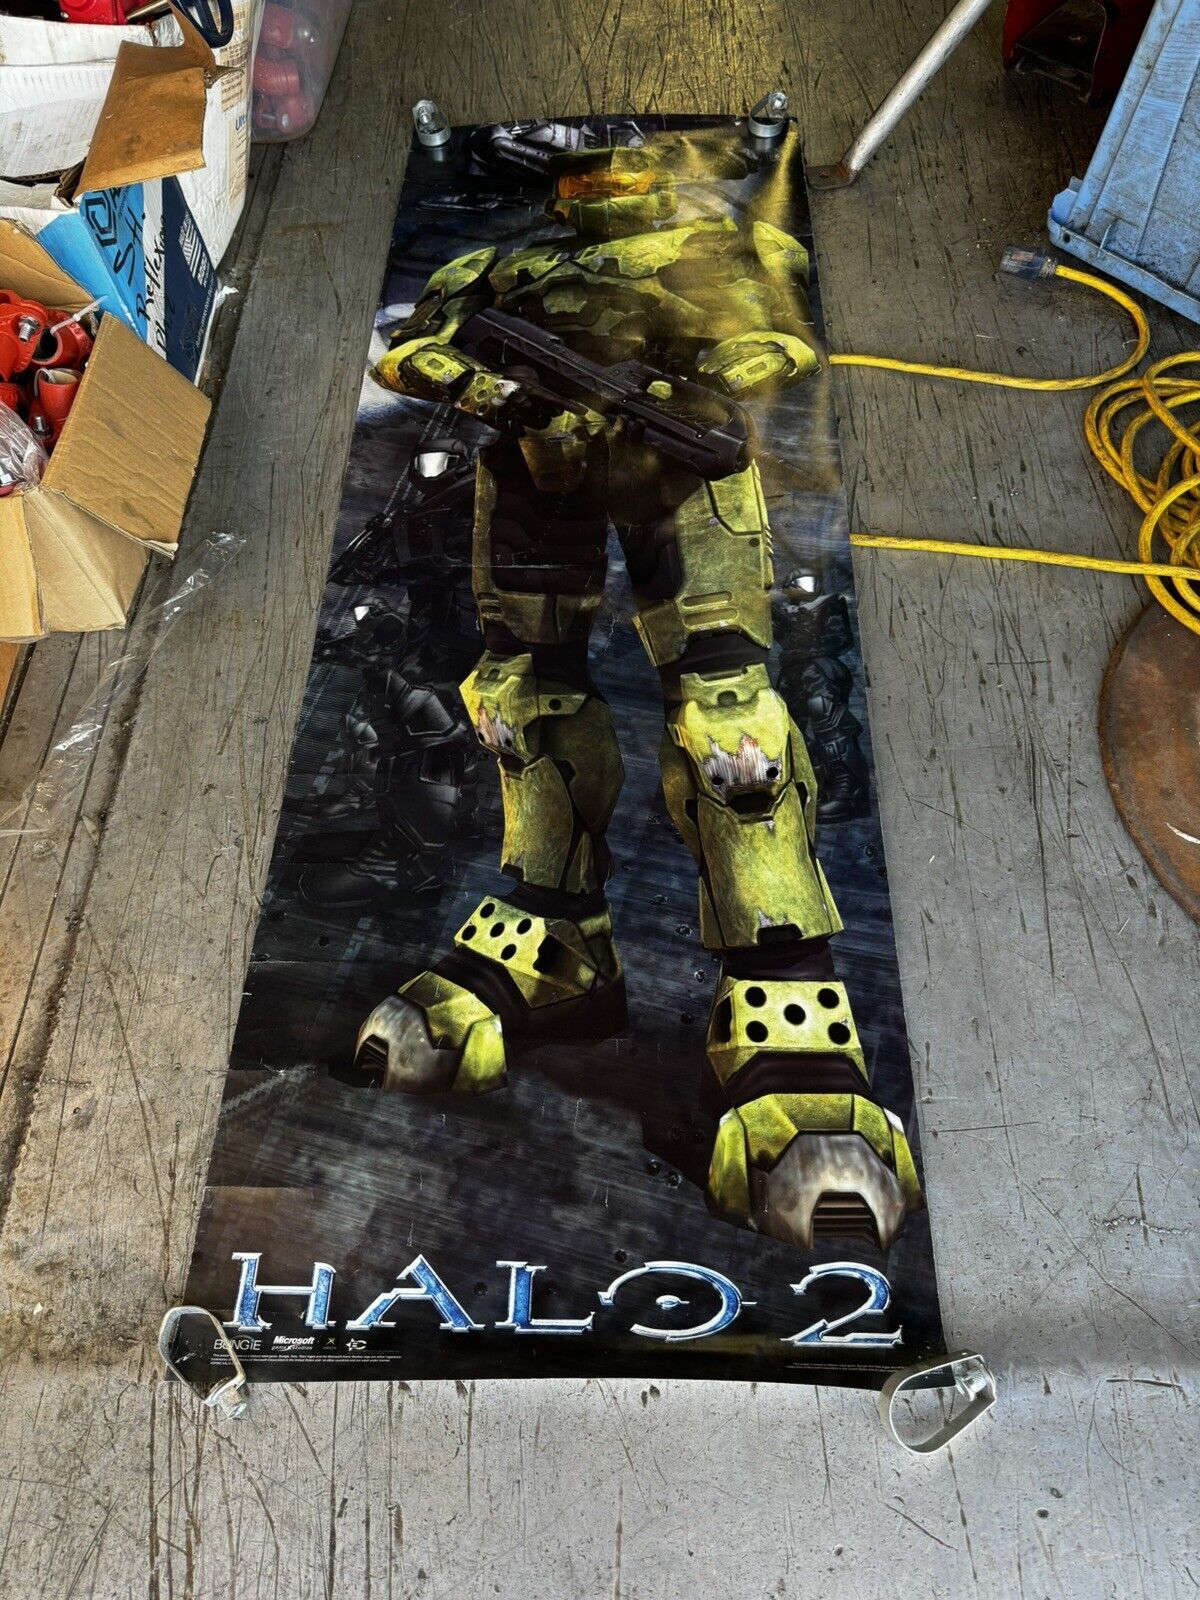 Halo 2 Vintage 2004 Authentic Large Poster 21”x60” Roughly Super Cool Xbox Game